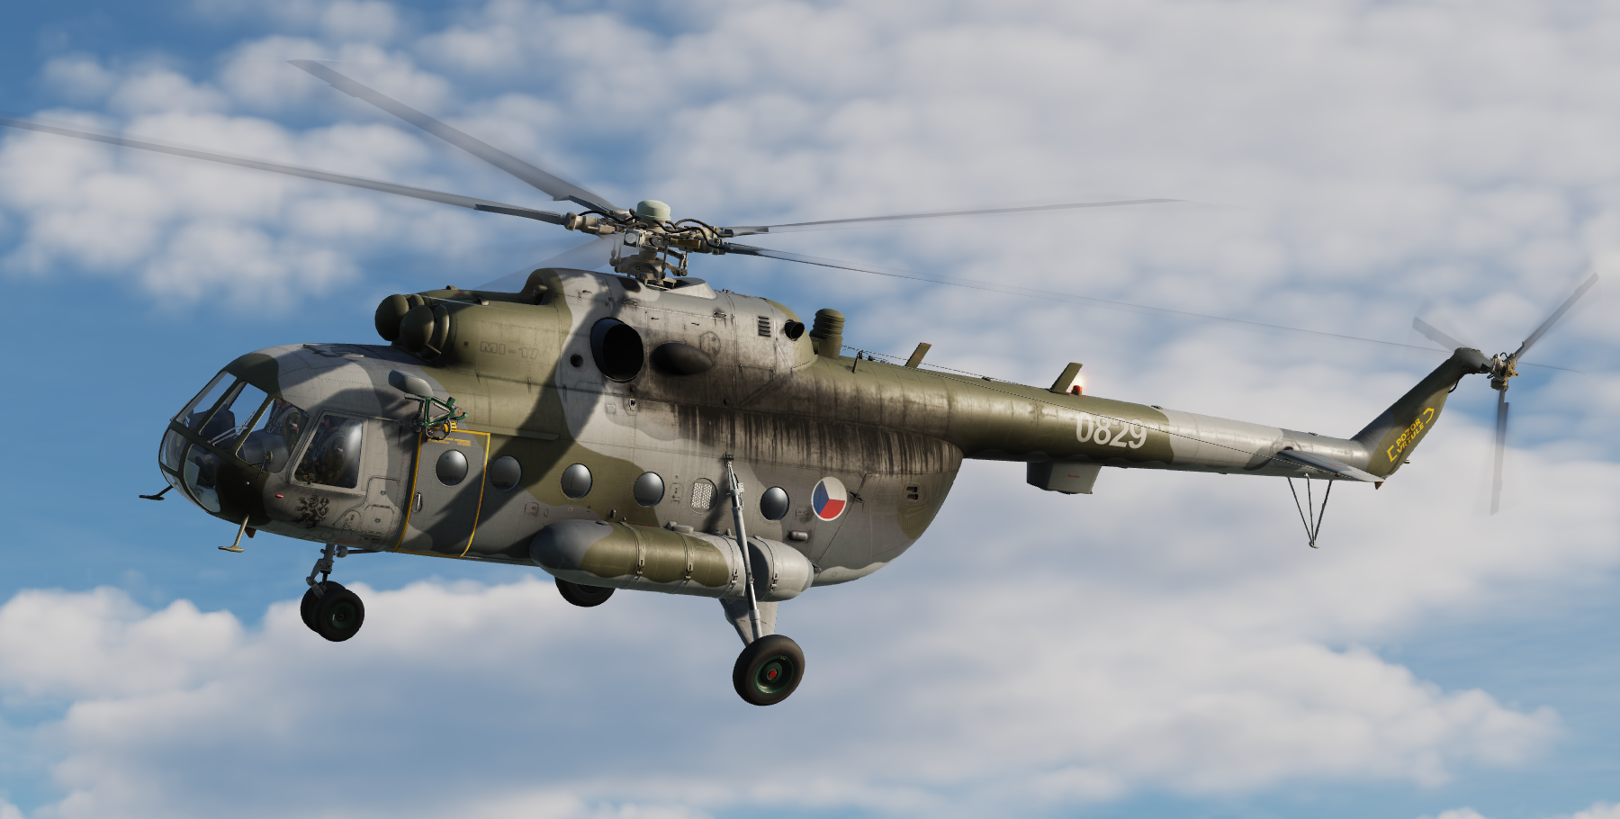 Historic Czech Mi-17 camouflage with colored insignia